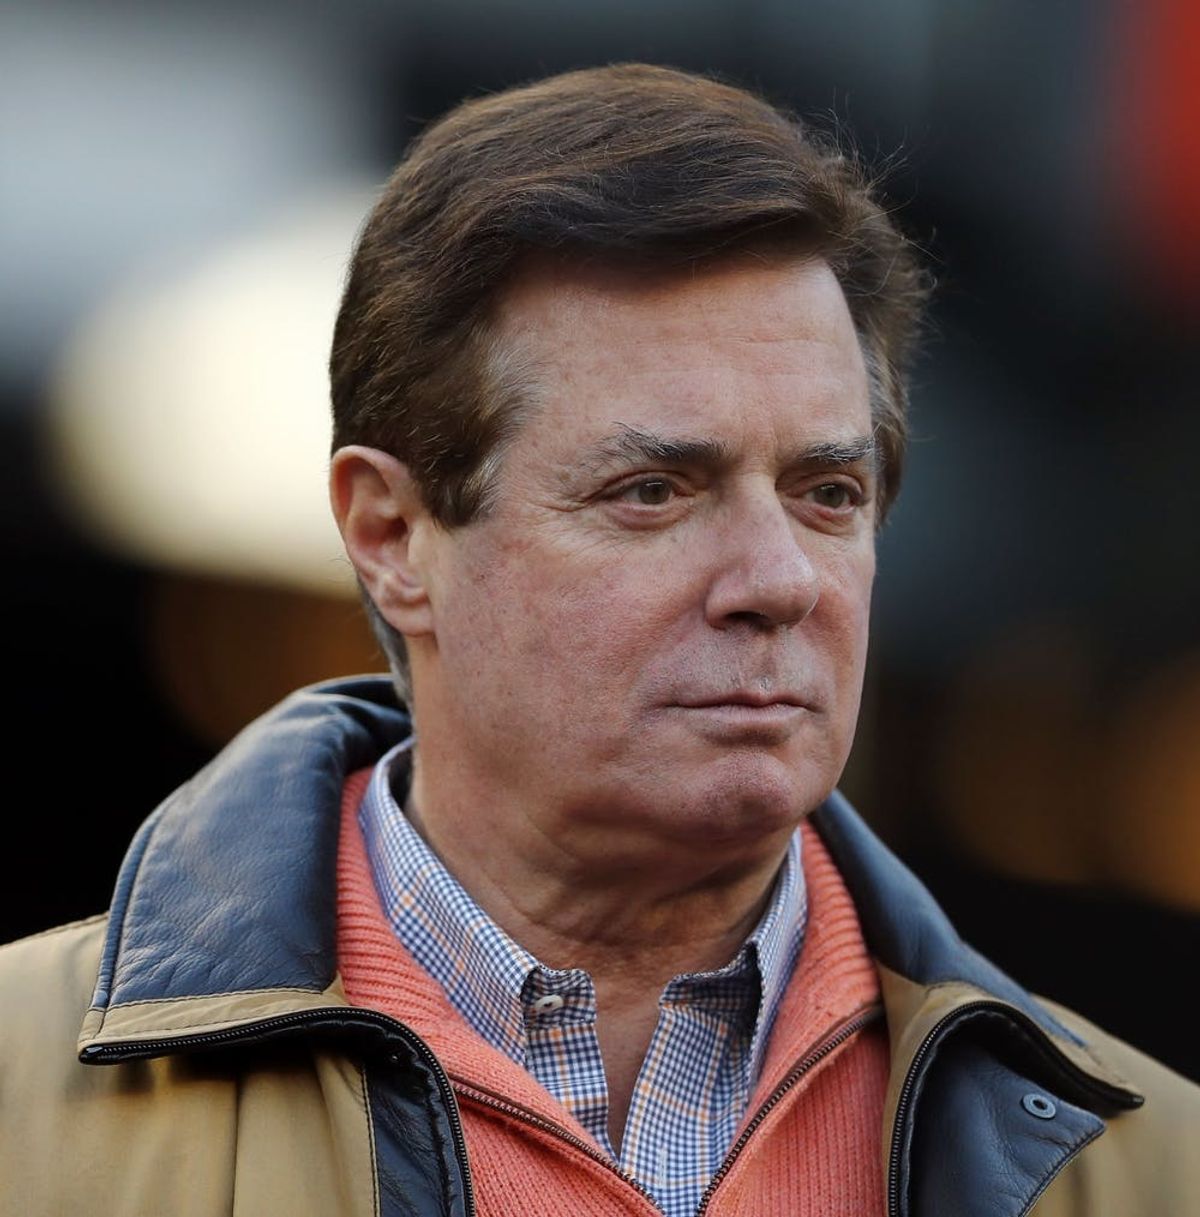 Former Presidential Campaign Aide Paul Manafort Has Turned Himself in to the FBI